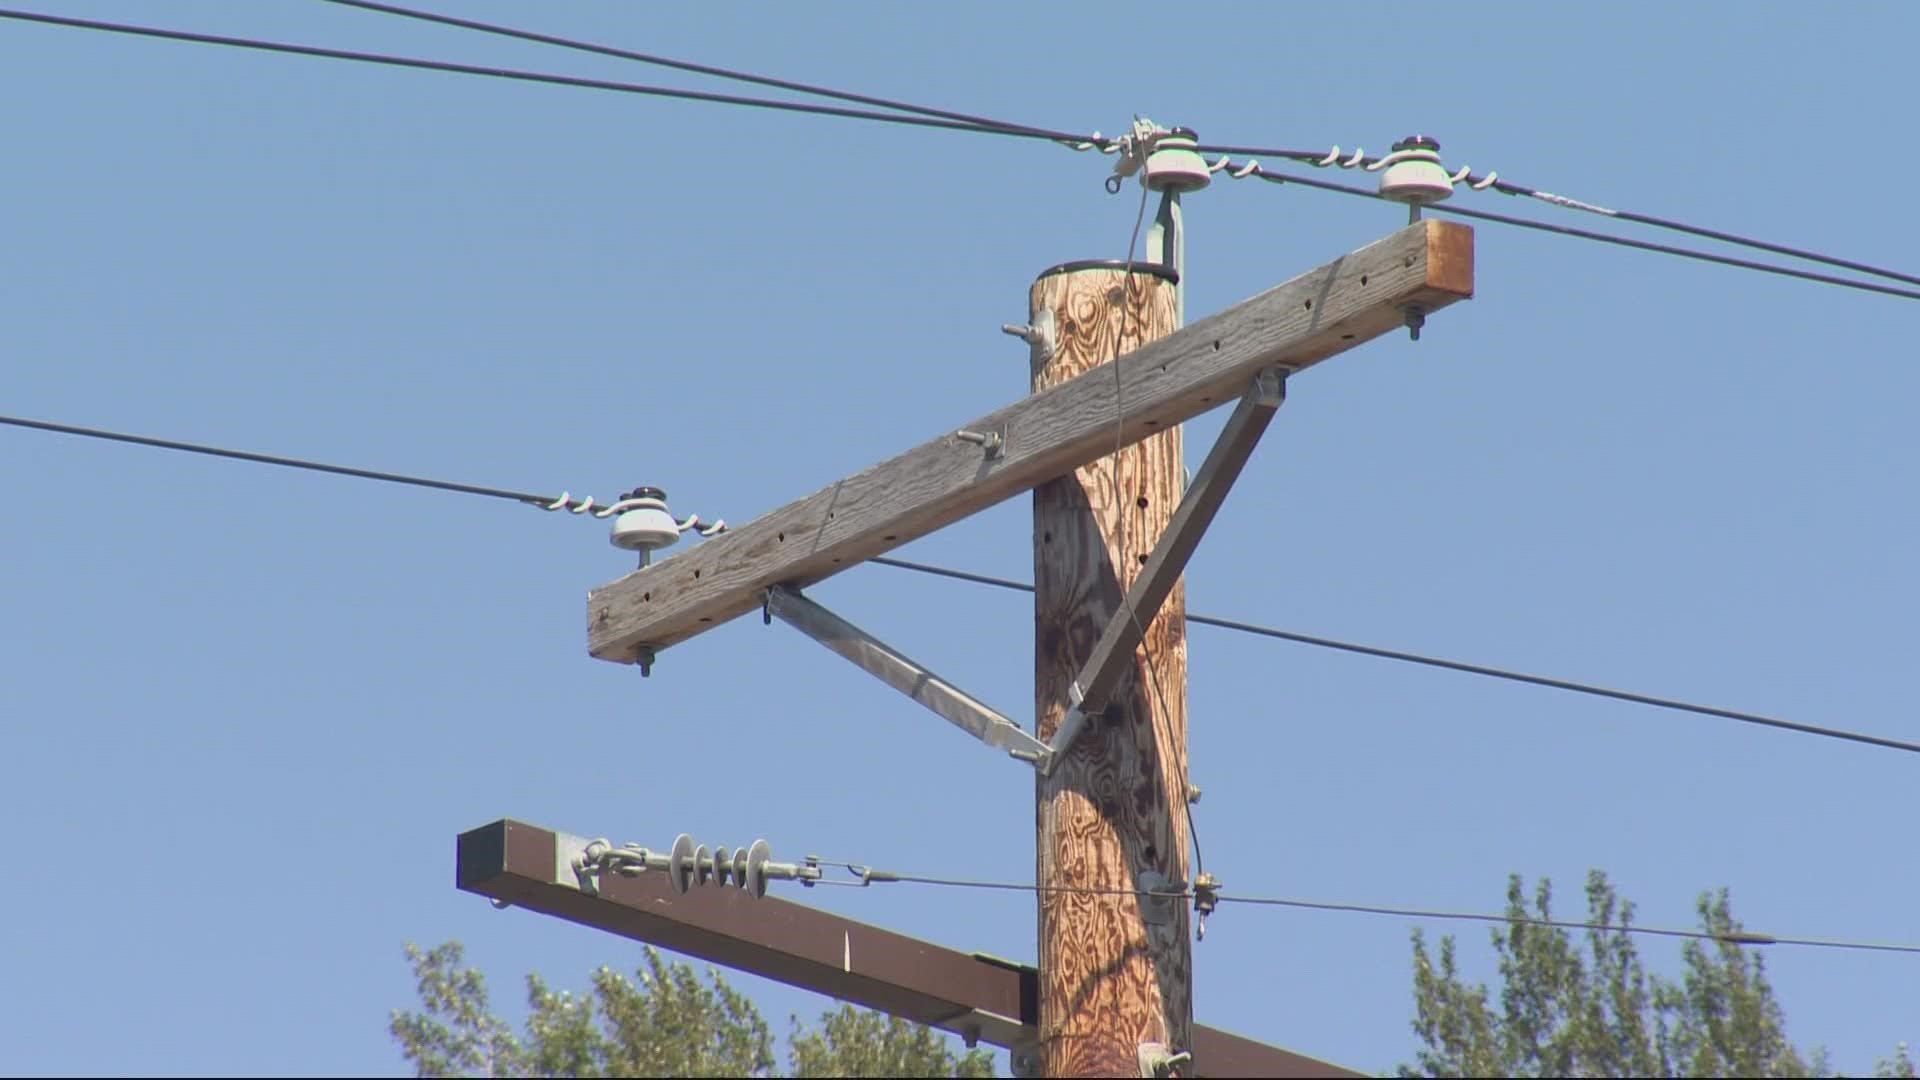 Portland General Electric cut power to more than 30,000 customers in the Portland metro area due to strong winds and dry conditions.